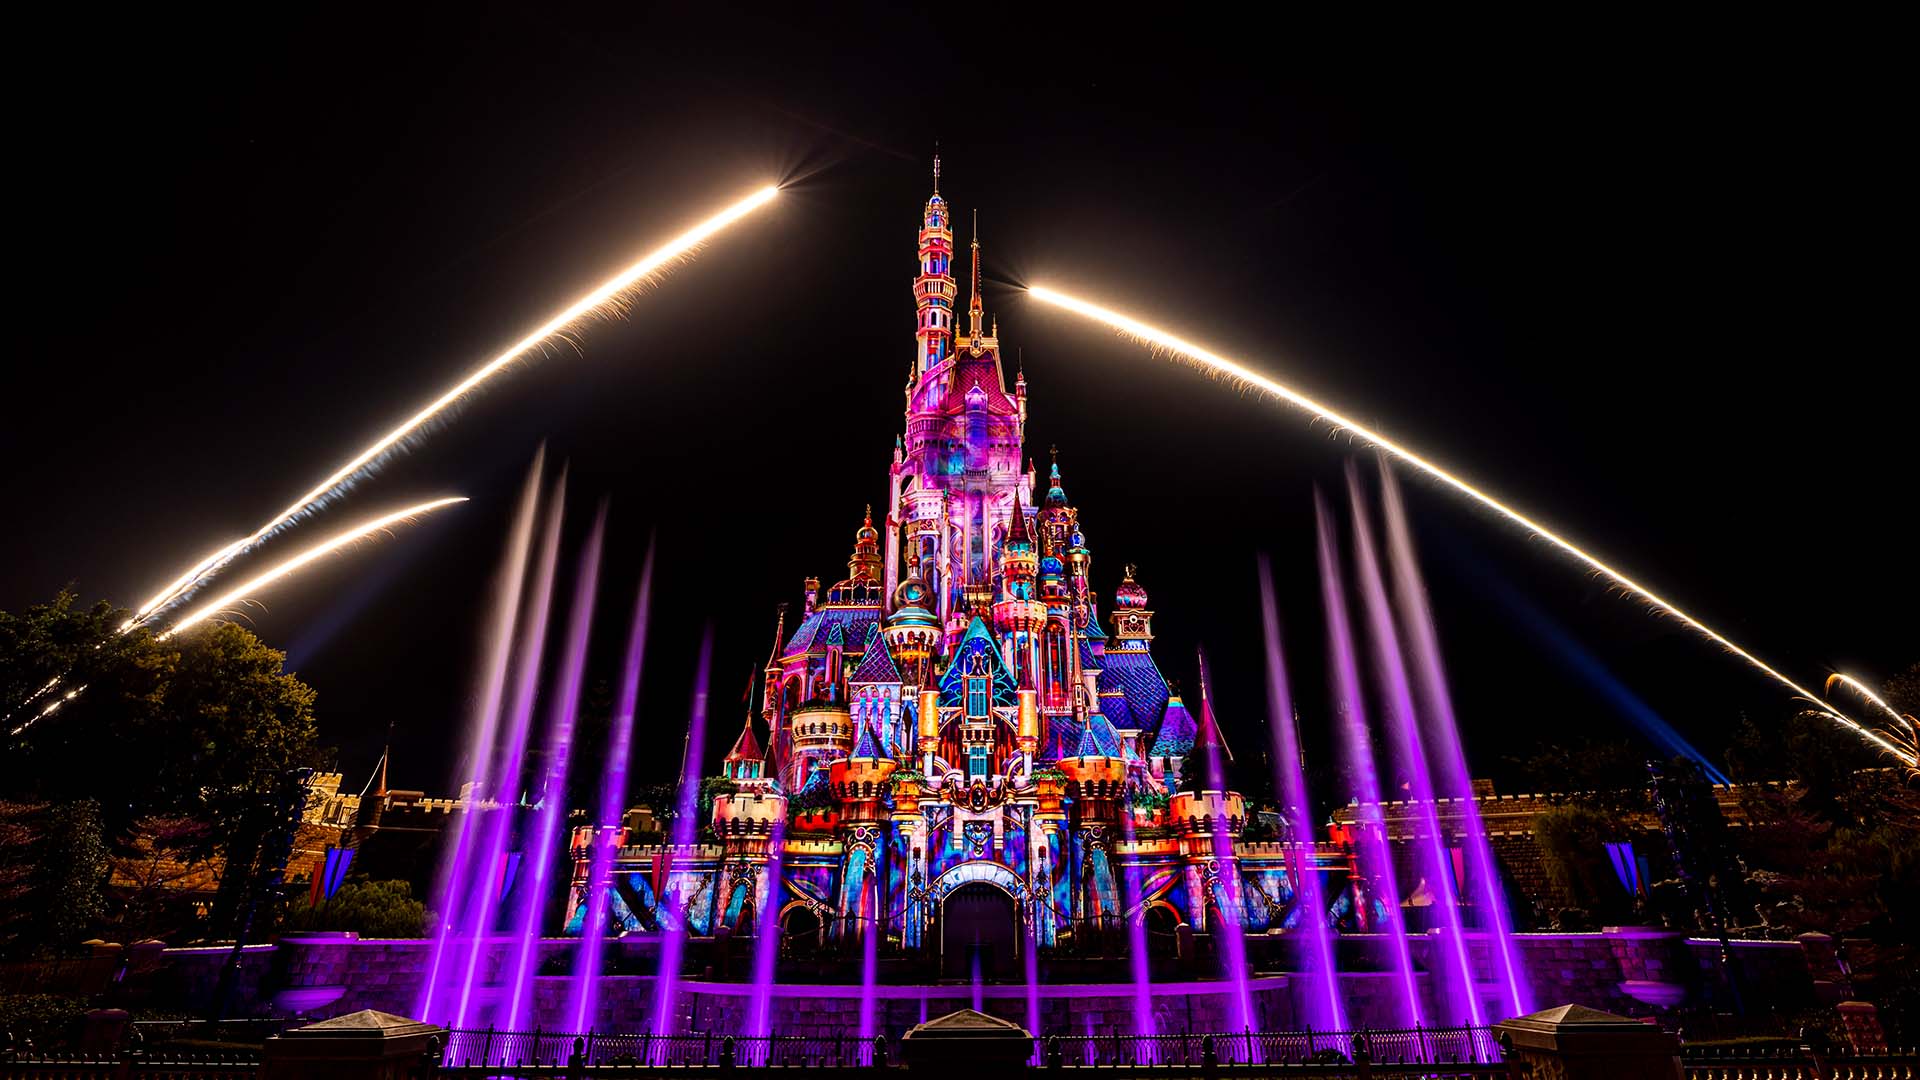 The ‘Momentous’ Nighttime Spectacular at Hong Kong Disneyland combines fireworks, choreographed fountains, lasers and 3D projection mapping